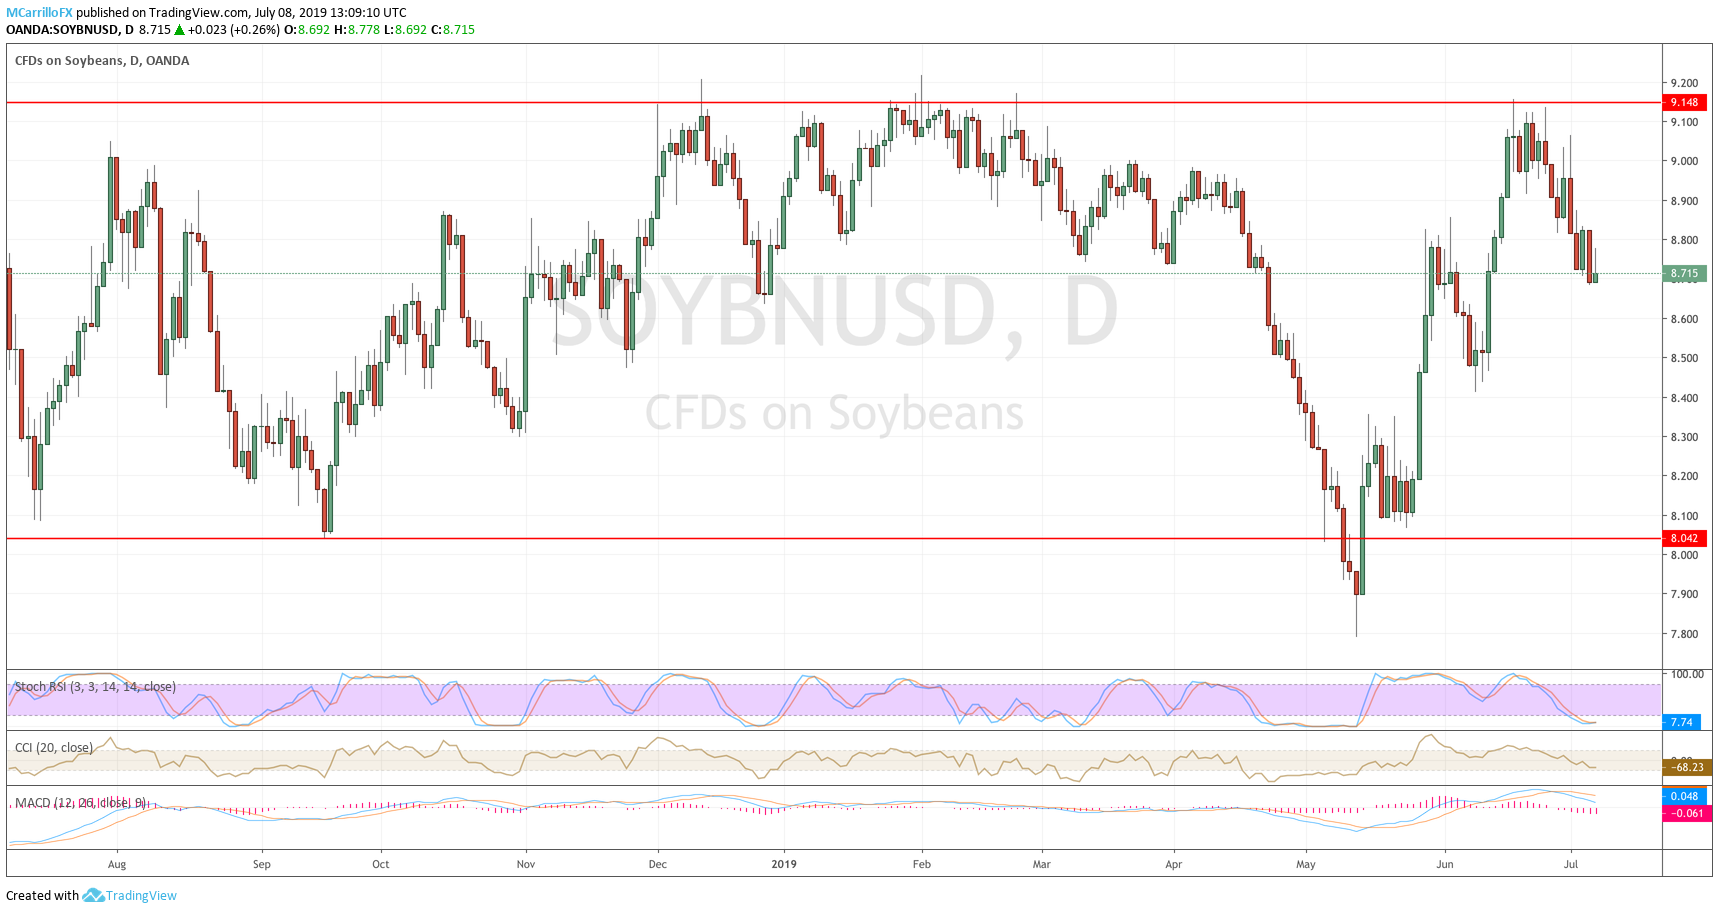 Soybean rices daily chart July 8